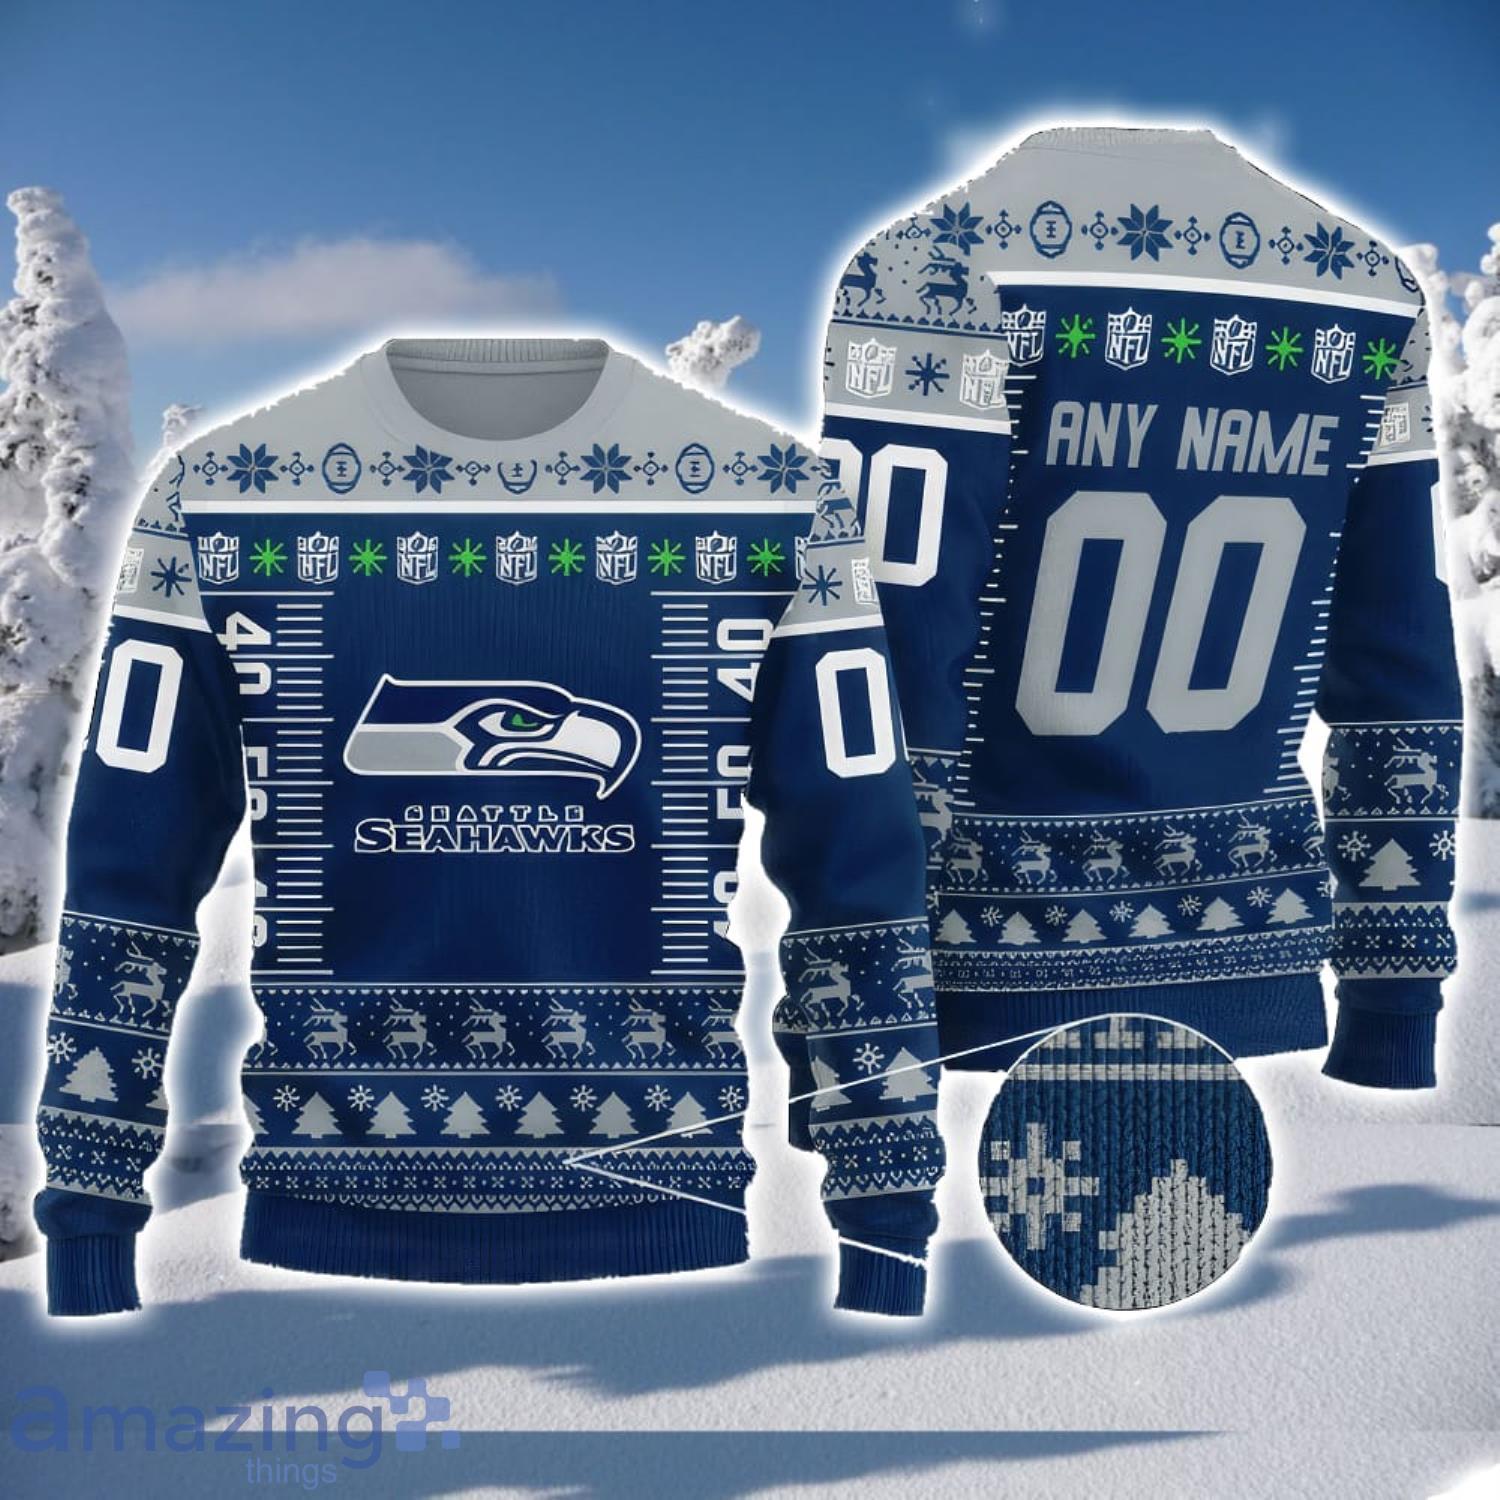 seattle seahawks ugly christmas sweater